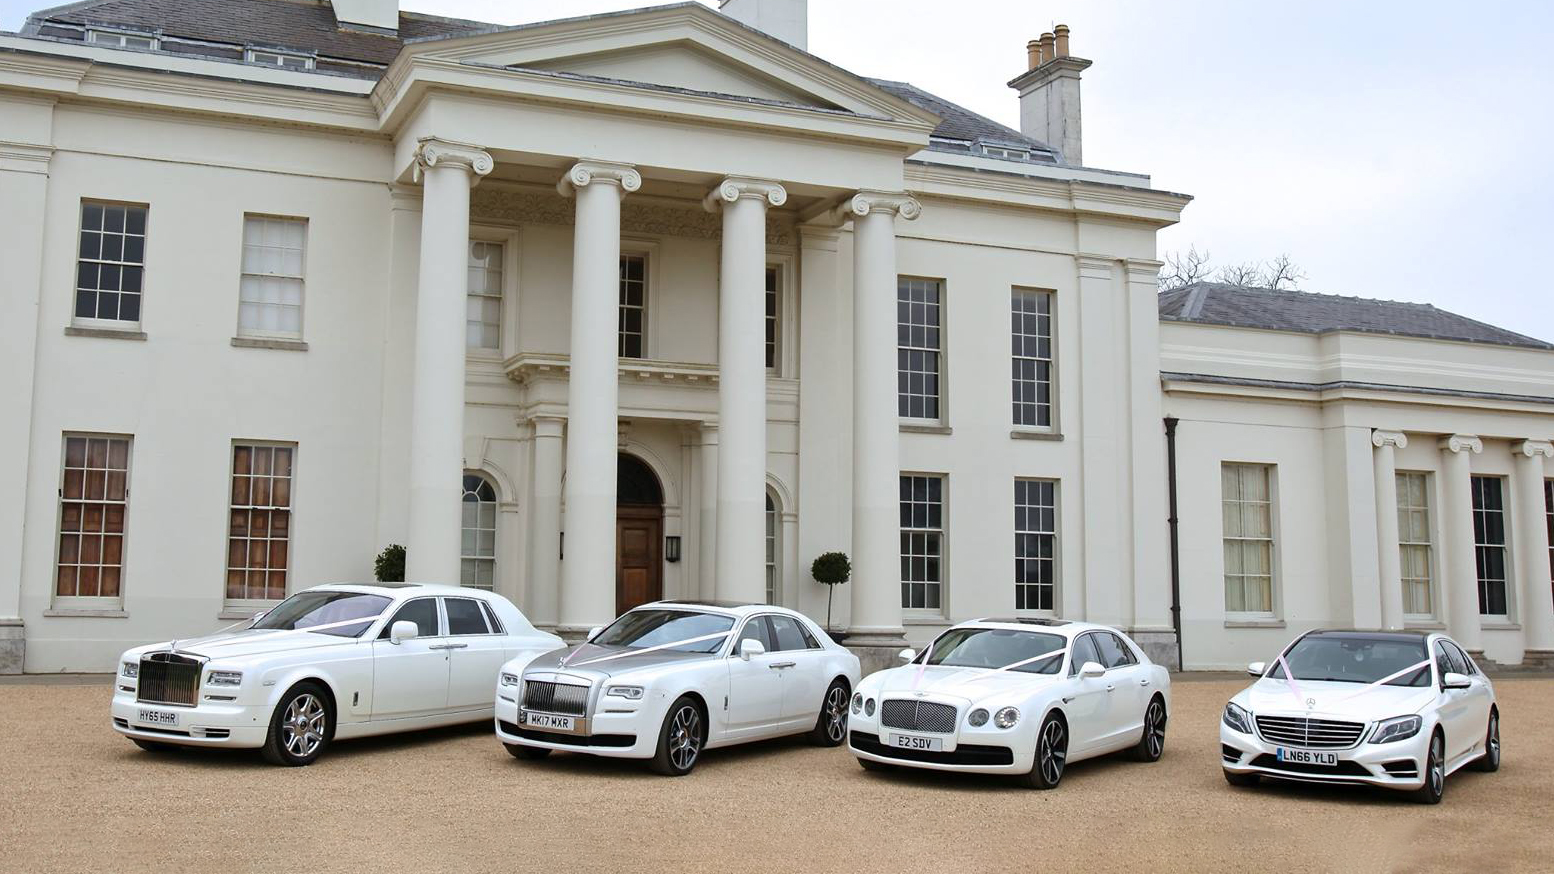 A selection of white Luxurious and modern vehicles all decorated with matching white ribbons on wedding duties in Ampthill. Frot Left to right: Rolls-Royce Phantom, Rolls-Royce Gho